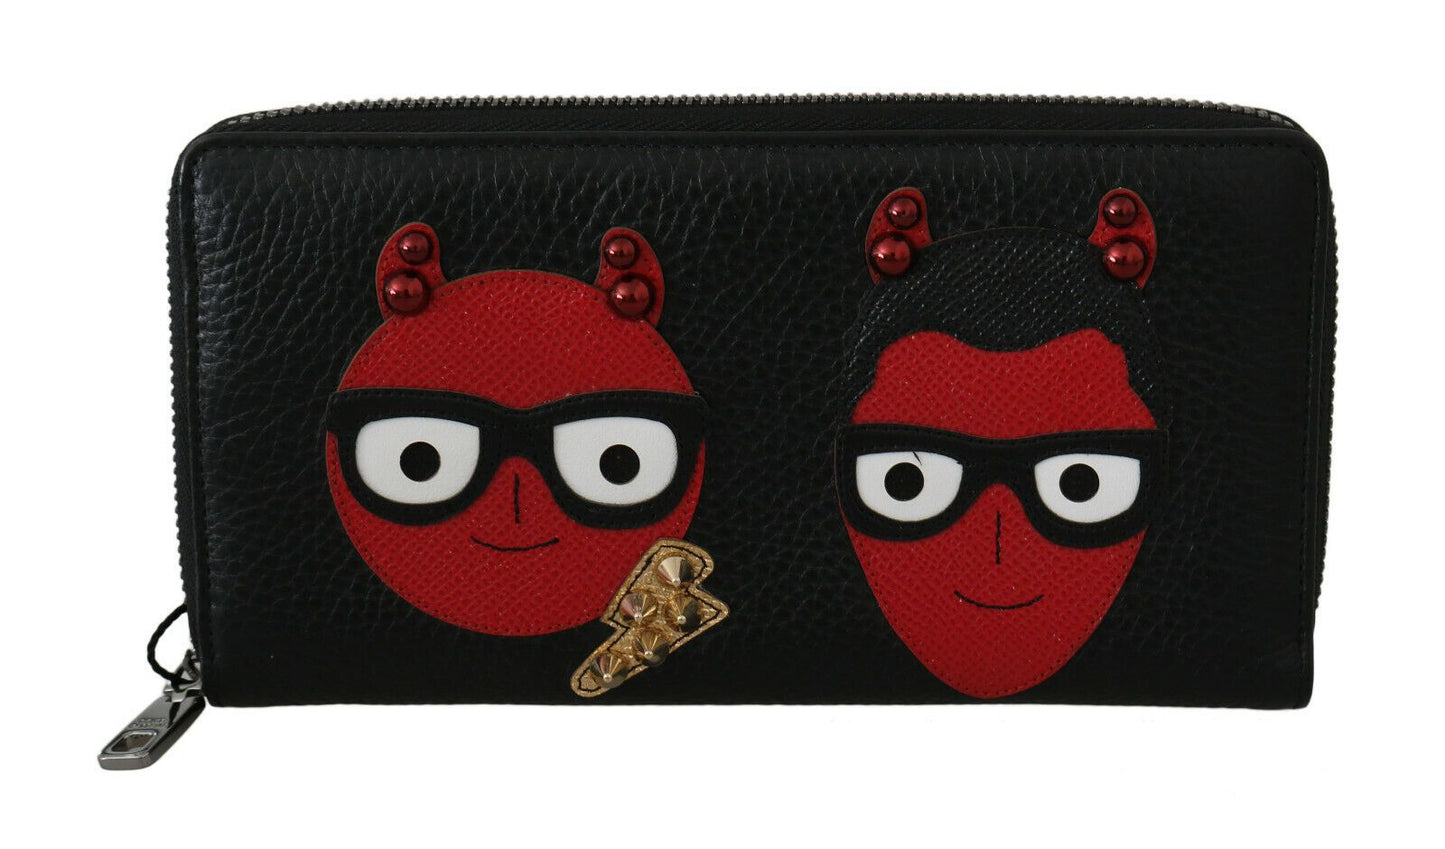 Dolce & Gabbana Chic Black and Red Leather Continental Wallet